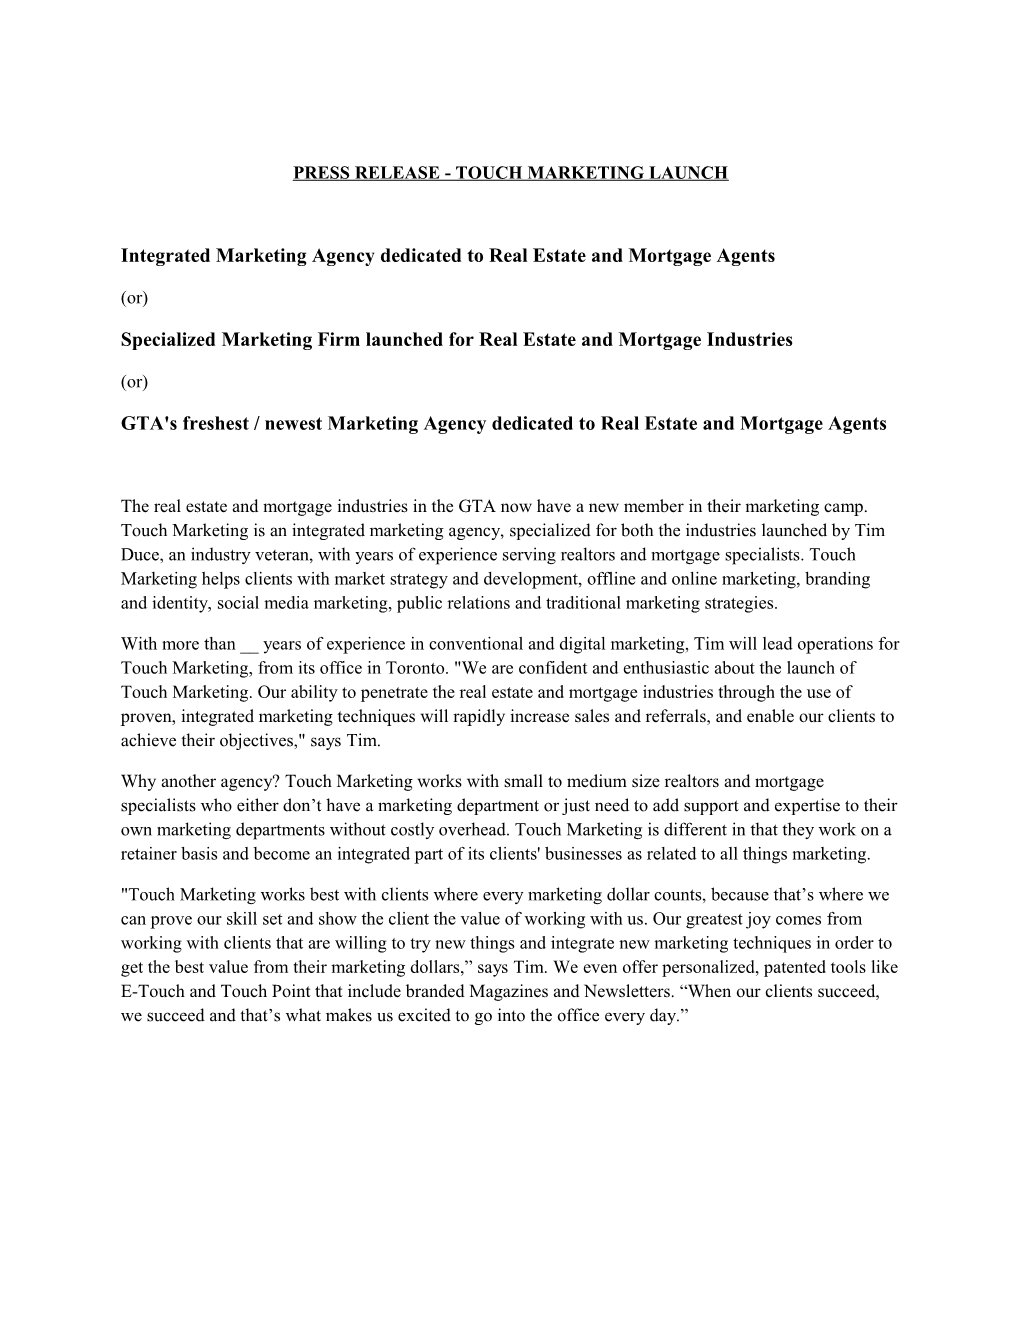 Press Release - Touch Marketing Launch